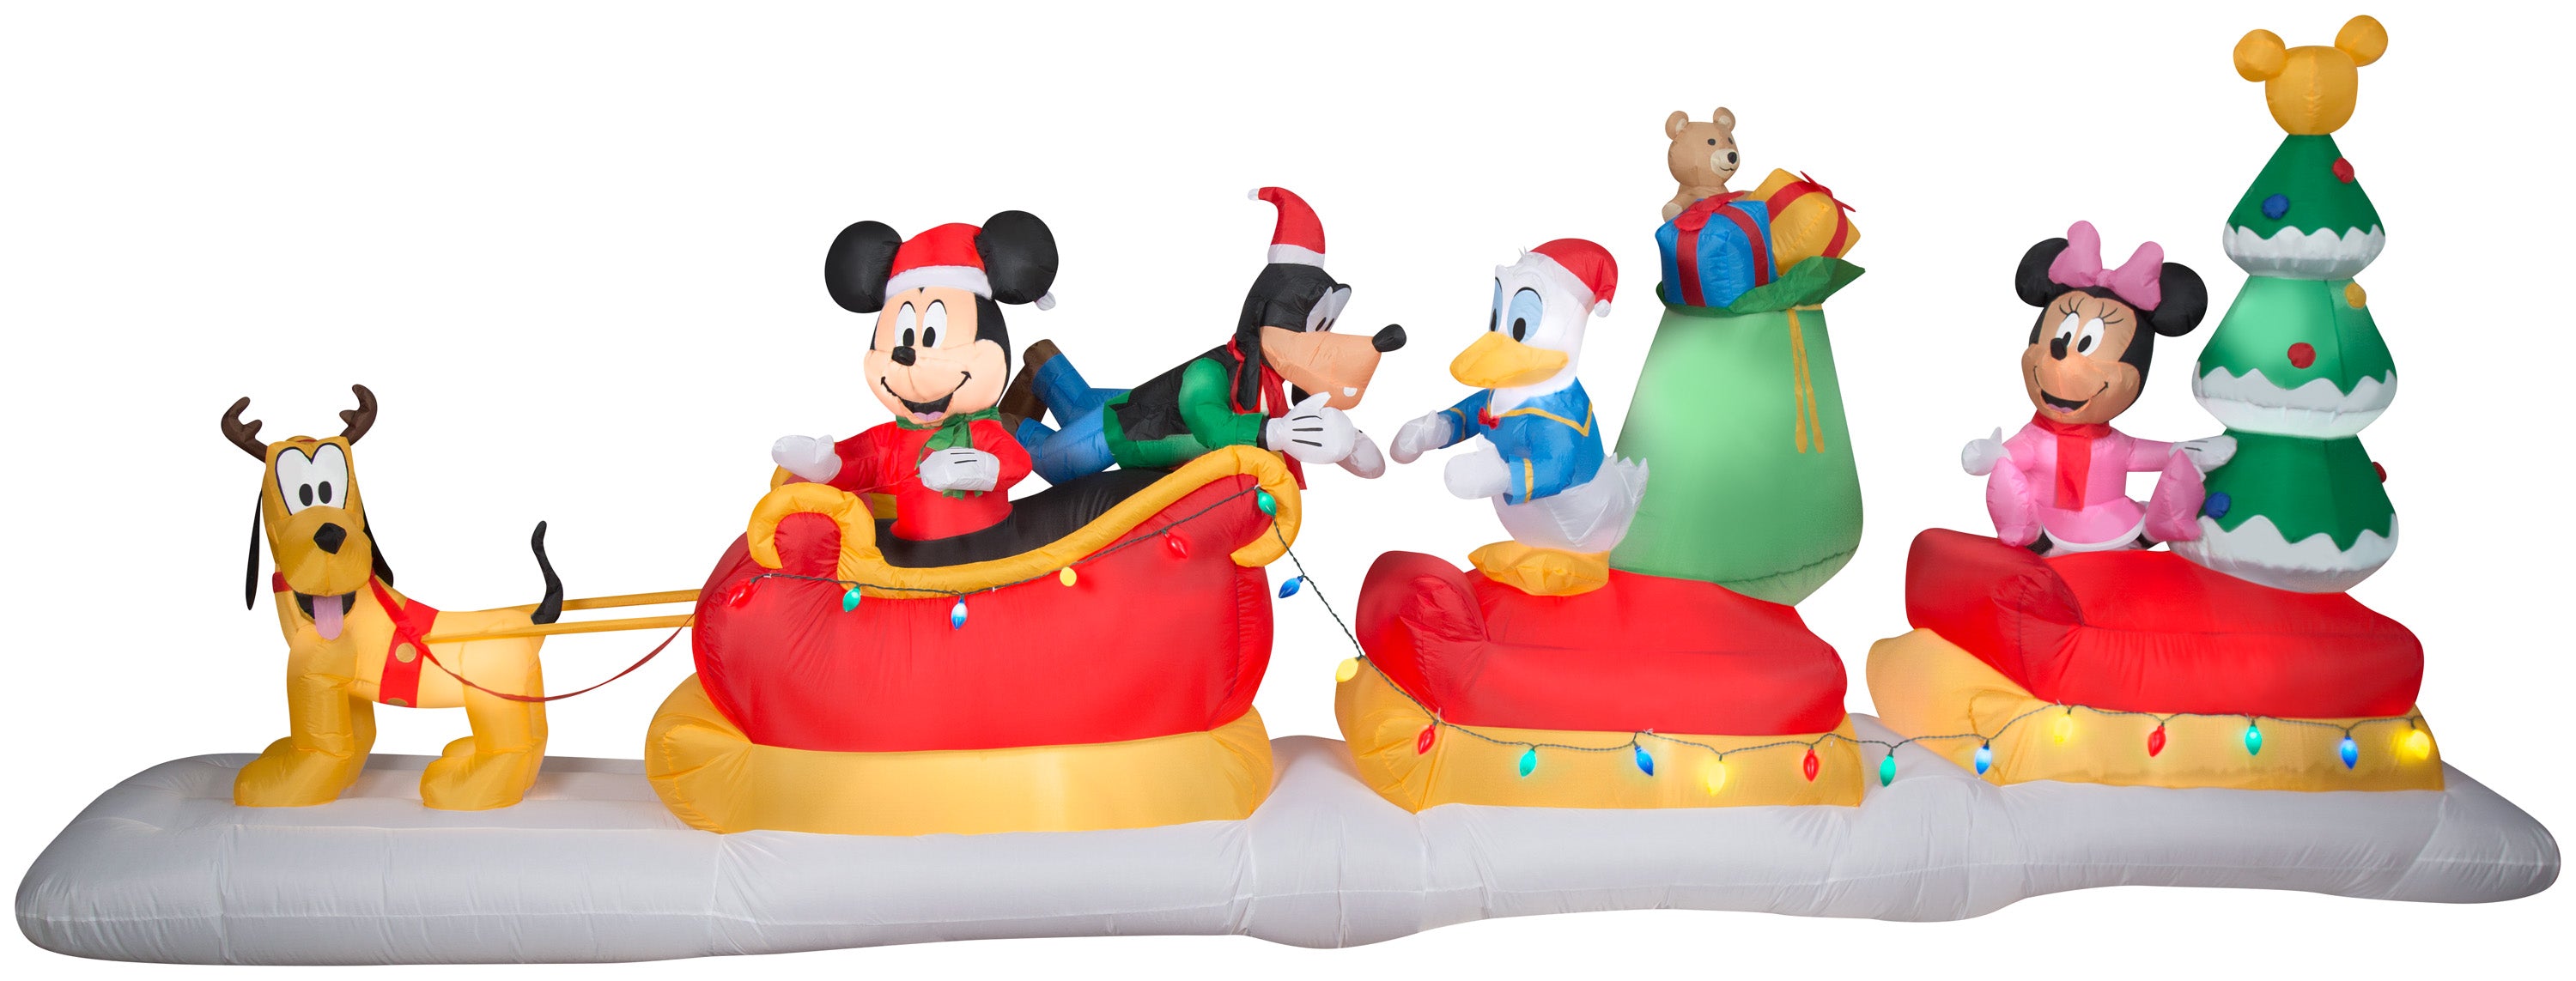 Gemmy Animated Airblown Inflatable Mickey Mouse and Friends Sleigh Scene, 15 ft Wide